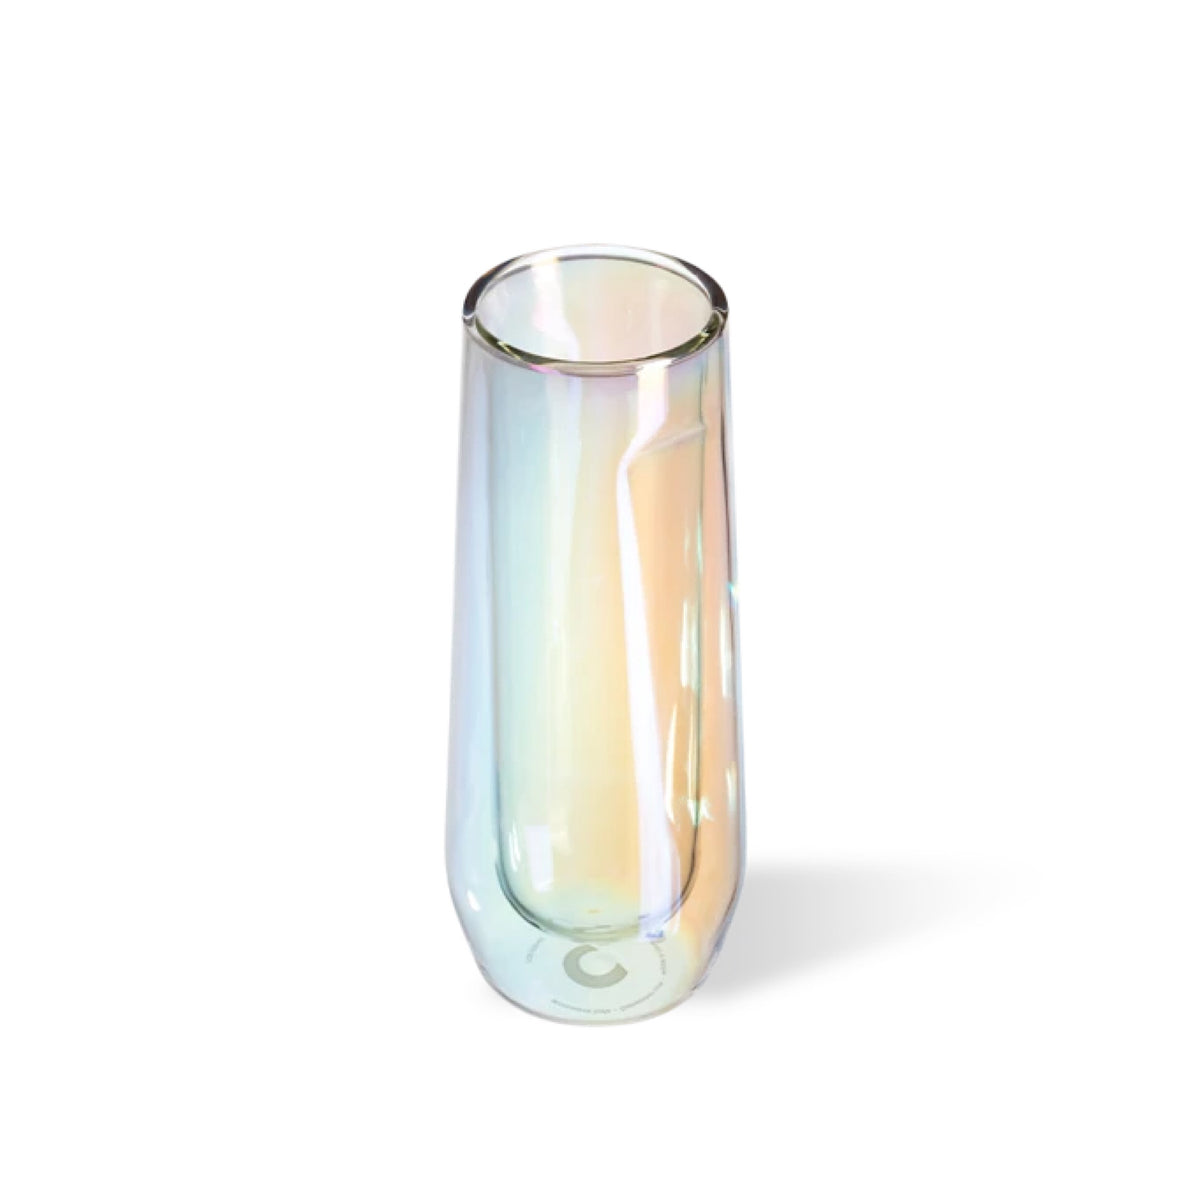 Double Walled Stemless Prism Flutes, Set of 2